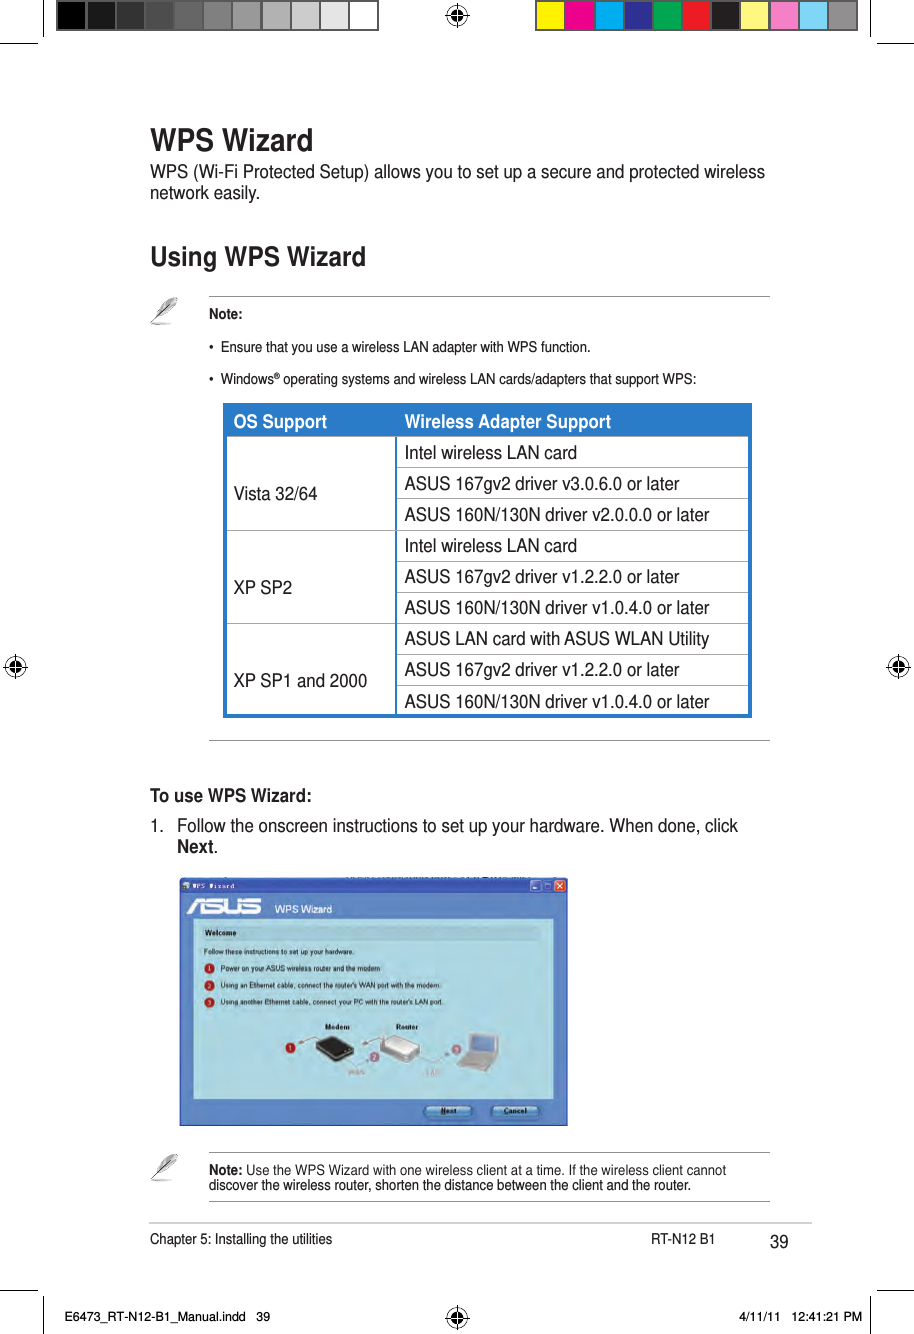 39Chapter 5: Installing the utilities                      RT-N12 B1WPS WizardWPS (Wi-Fi Protected Setup) allows you to set up a secure and protected wireless network easily.Using WPS WizardTo use WPS Wizard:1.  Follow the onscreen instructions to set up your hardware. When done, click Next.Note: Use the WPS Wizard with one wireless client at a time. If the wireless client cannot discover the wireless router, shorten the distance between the client and the router.Note:•  Ensure that you use a wireless LAN adapter with WPS function.•  Windows® operating systems and wireless LAN cards/adapters that support WPS:                 OS Support Wireless Adapter Support Vista 32/64Intel wireless LAN cardASUS 167gv2 driver v3.0.6.0 or laterASUS 160N/130N driver v2.0.0.0 or later XP SP2Intel wireless LAN cardASUS 167gv2 driver v1.2.2.0 or laterASUS 160N/130N driver v1.0.4.0 or later XP SP1 and 2000ASUS LAN card with ASUS WLAN UtilityASUS 167gv2 driver v1.2.2.0 or laterASUS 160N/130N driver v1.0.4.0 or laterE6473_RT-N12-B1_Manual.indd   39 4/11/11   12:41:21 PM